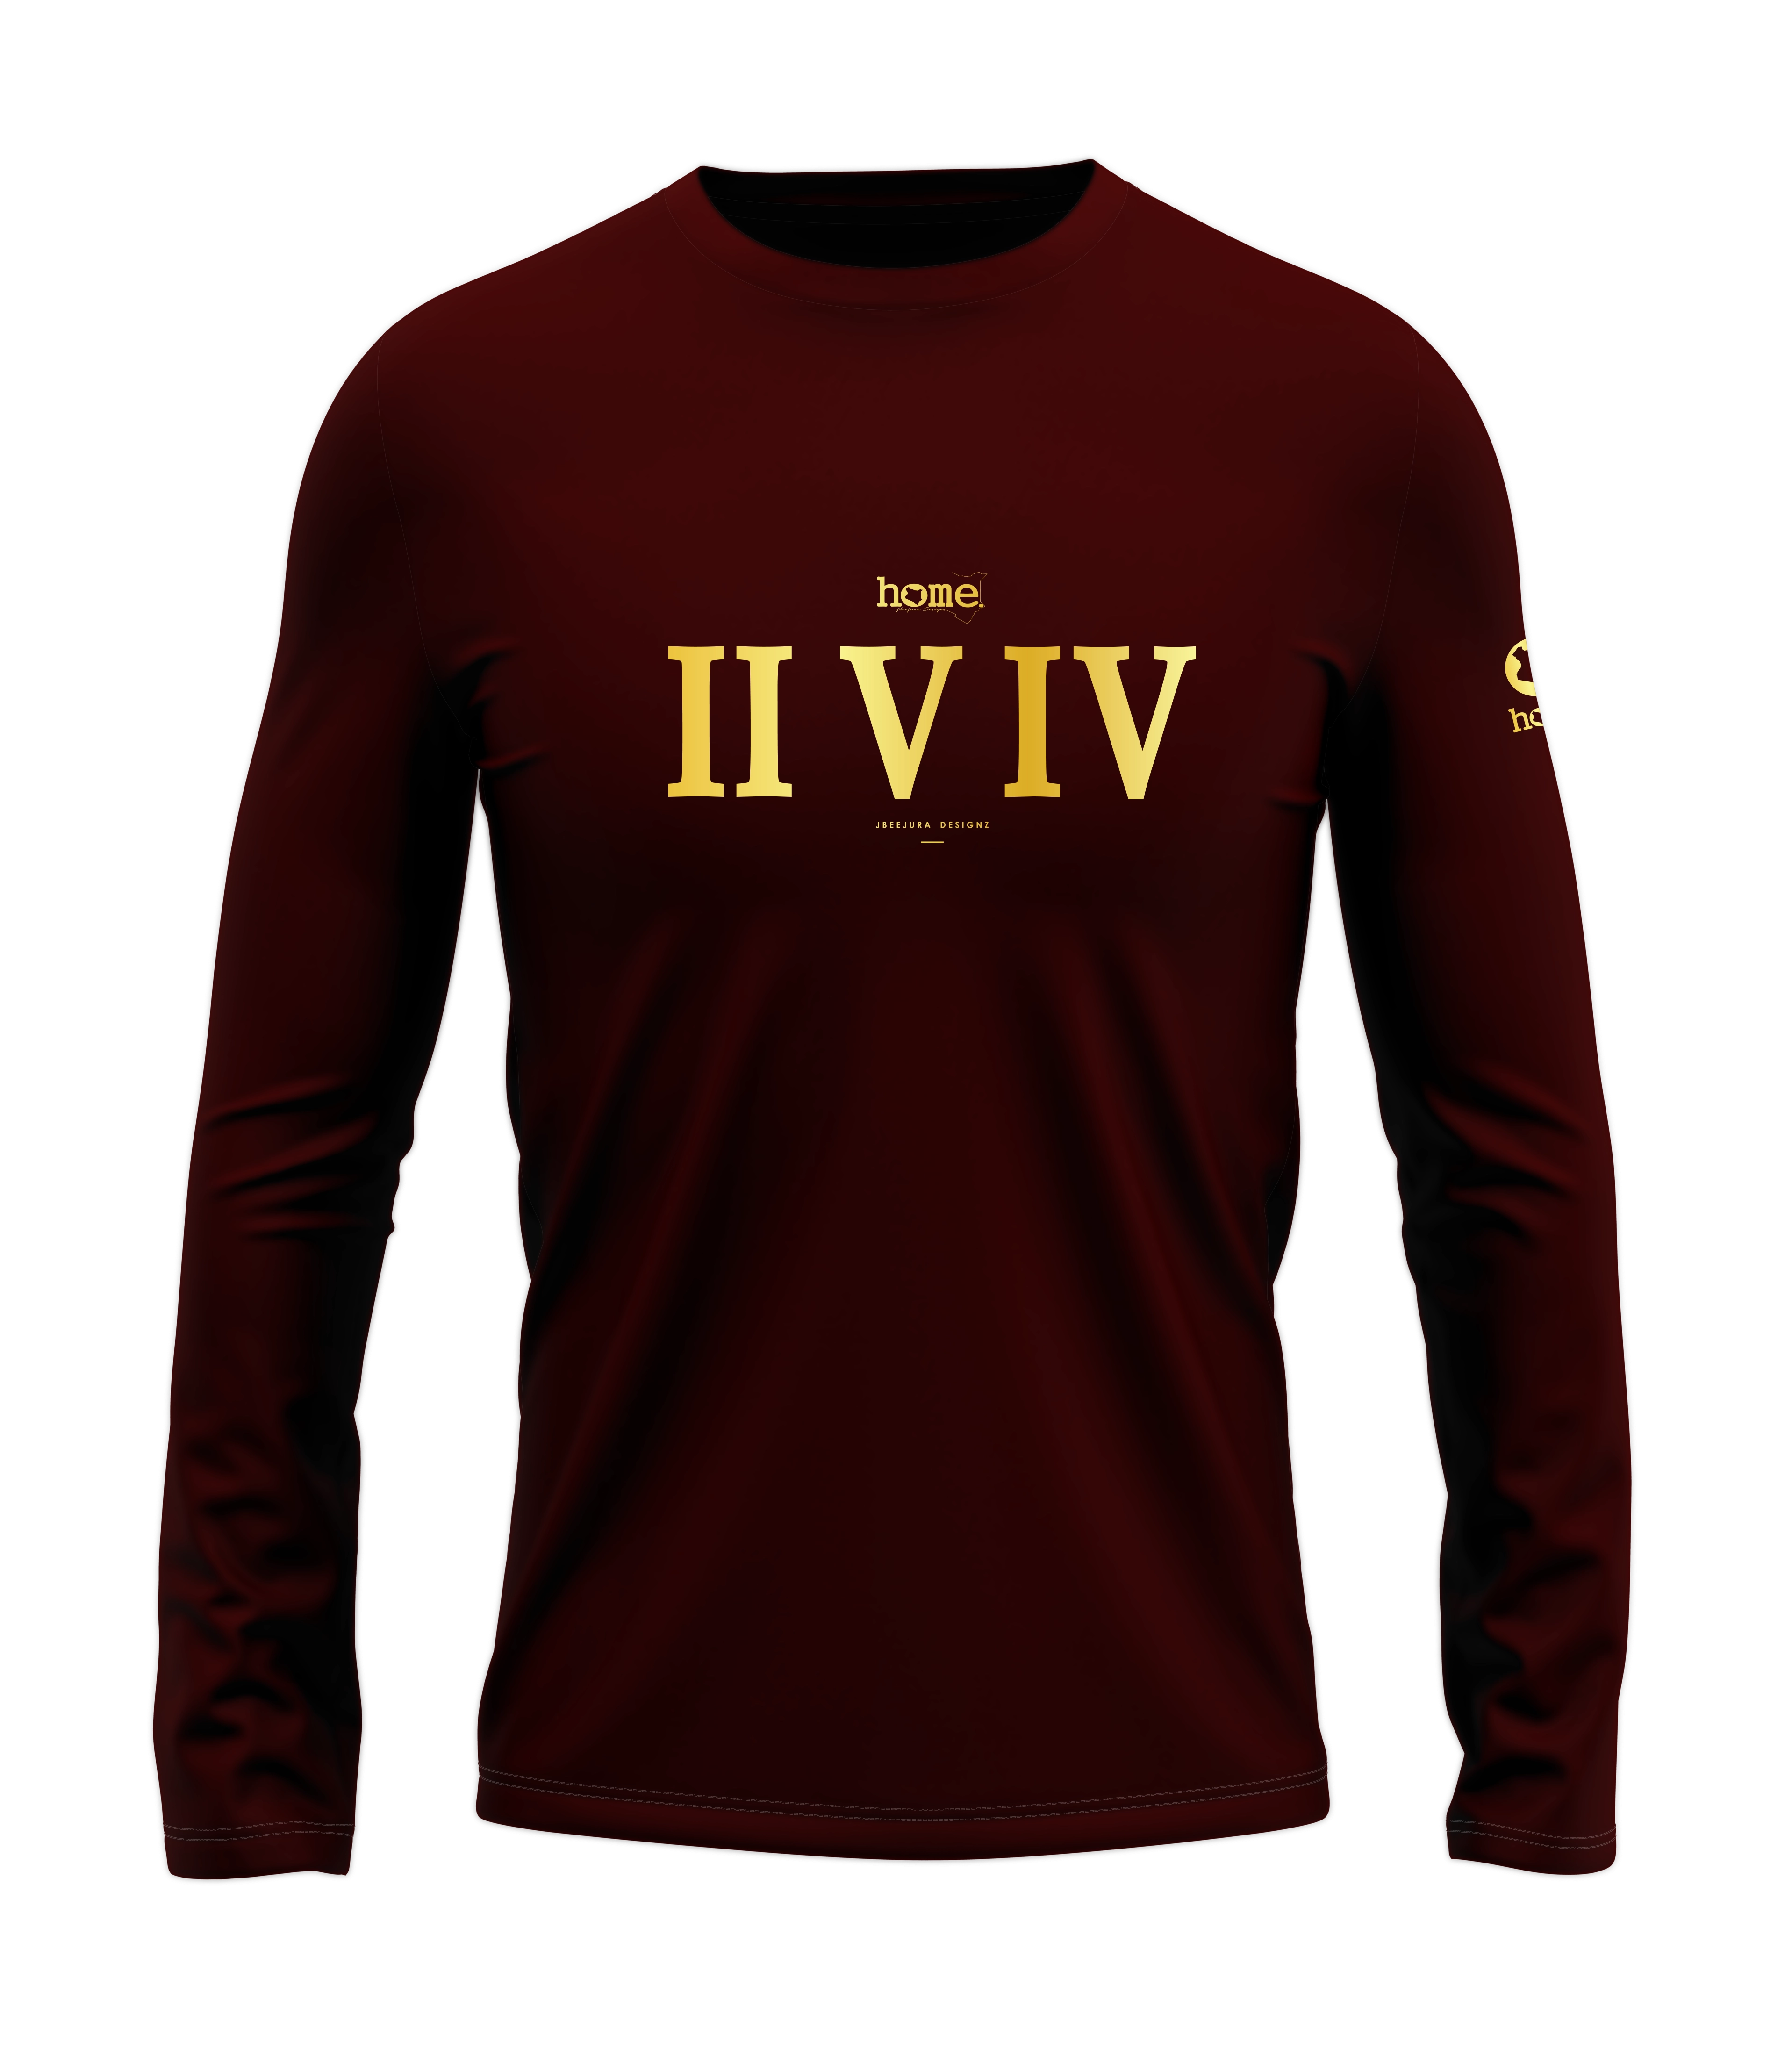 home_254 LONG-SLEEVED MAROON T-SHIRT WITH A GOLD ROMAN NUMERALS PRINT – COTTON PLUS FABRIC